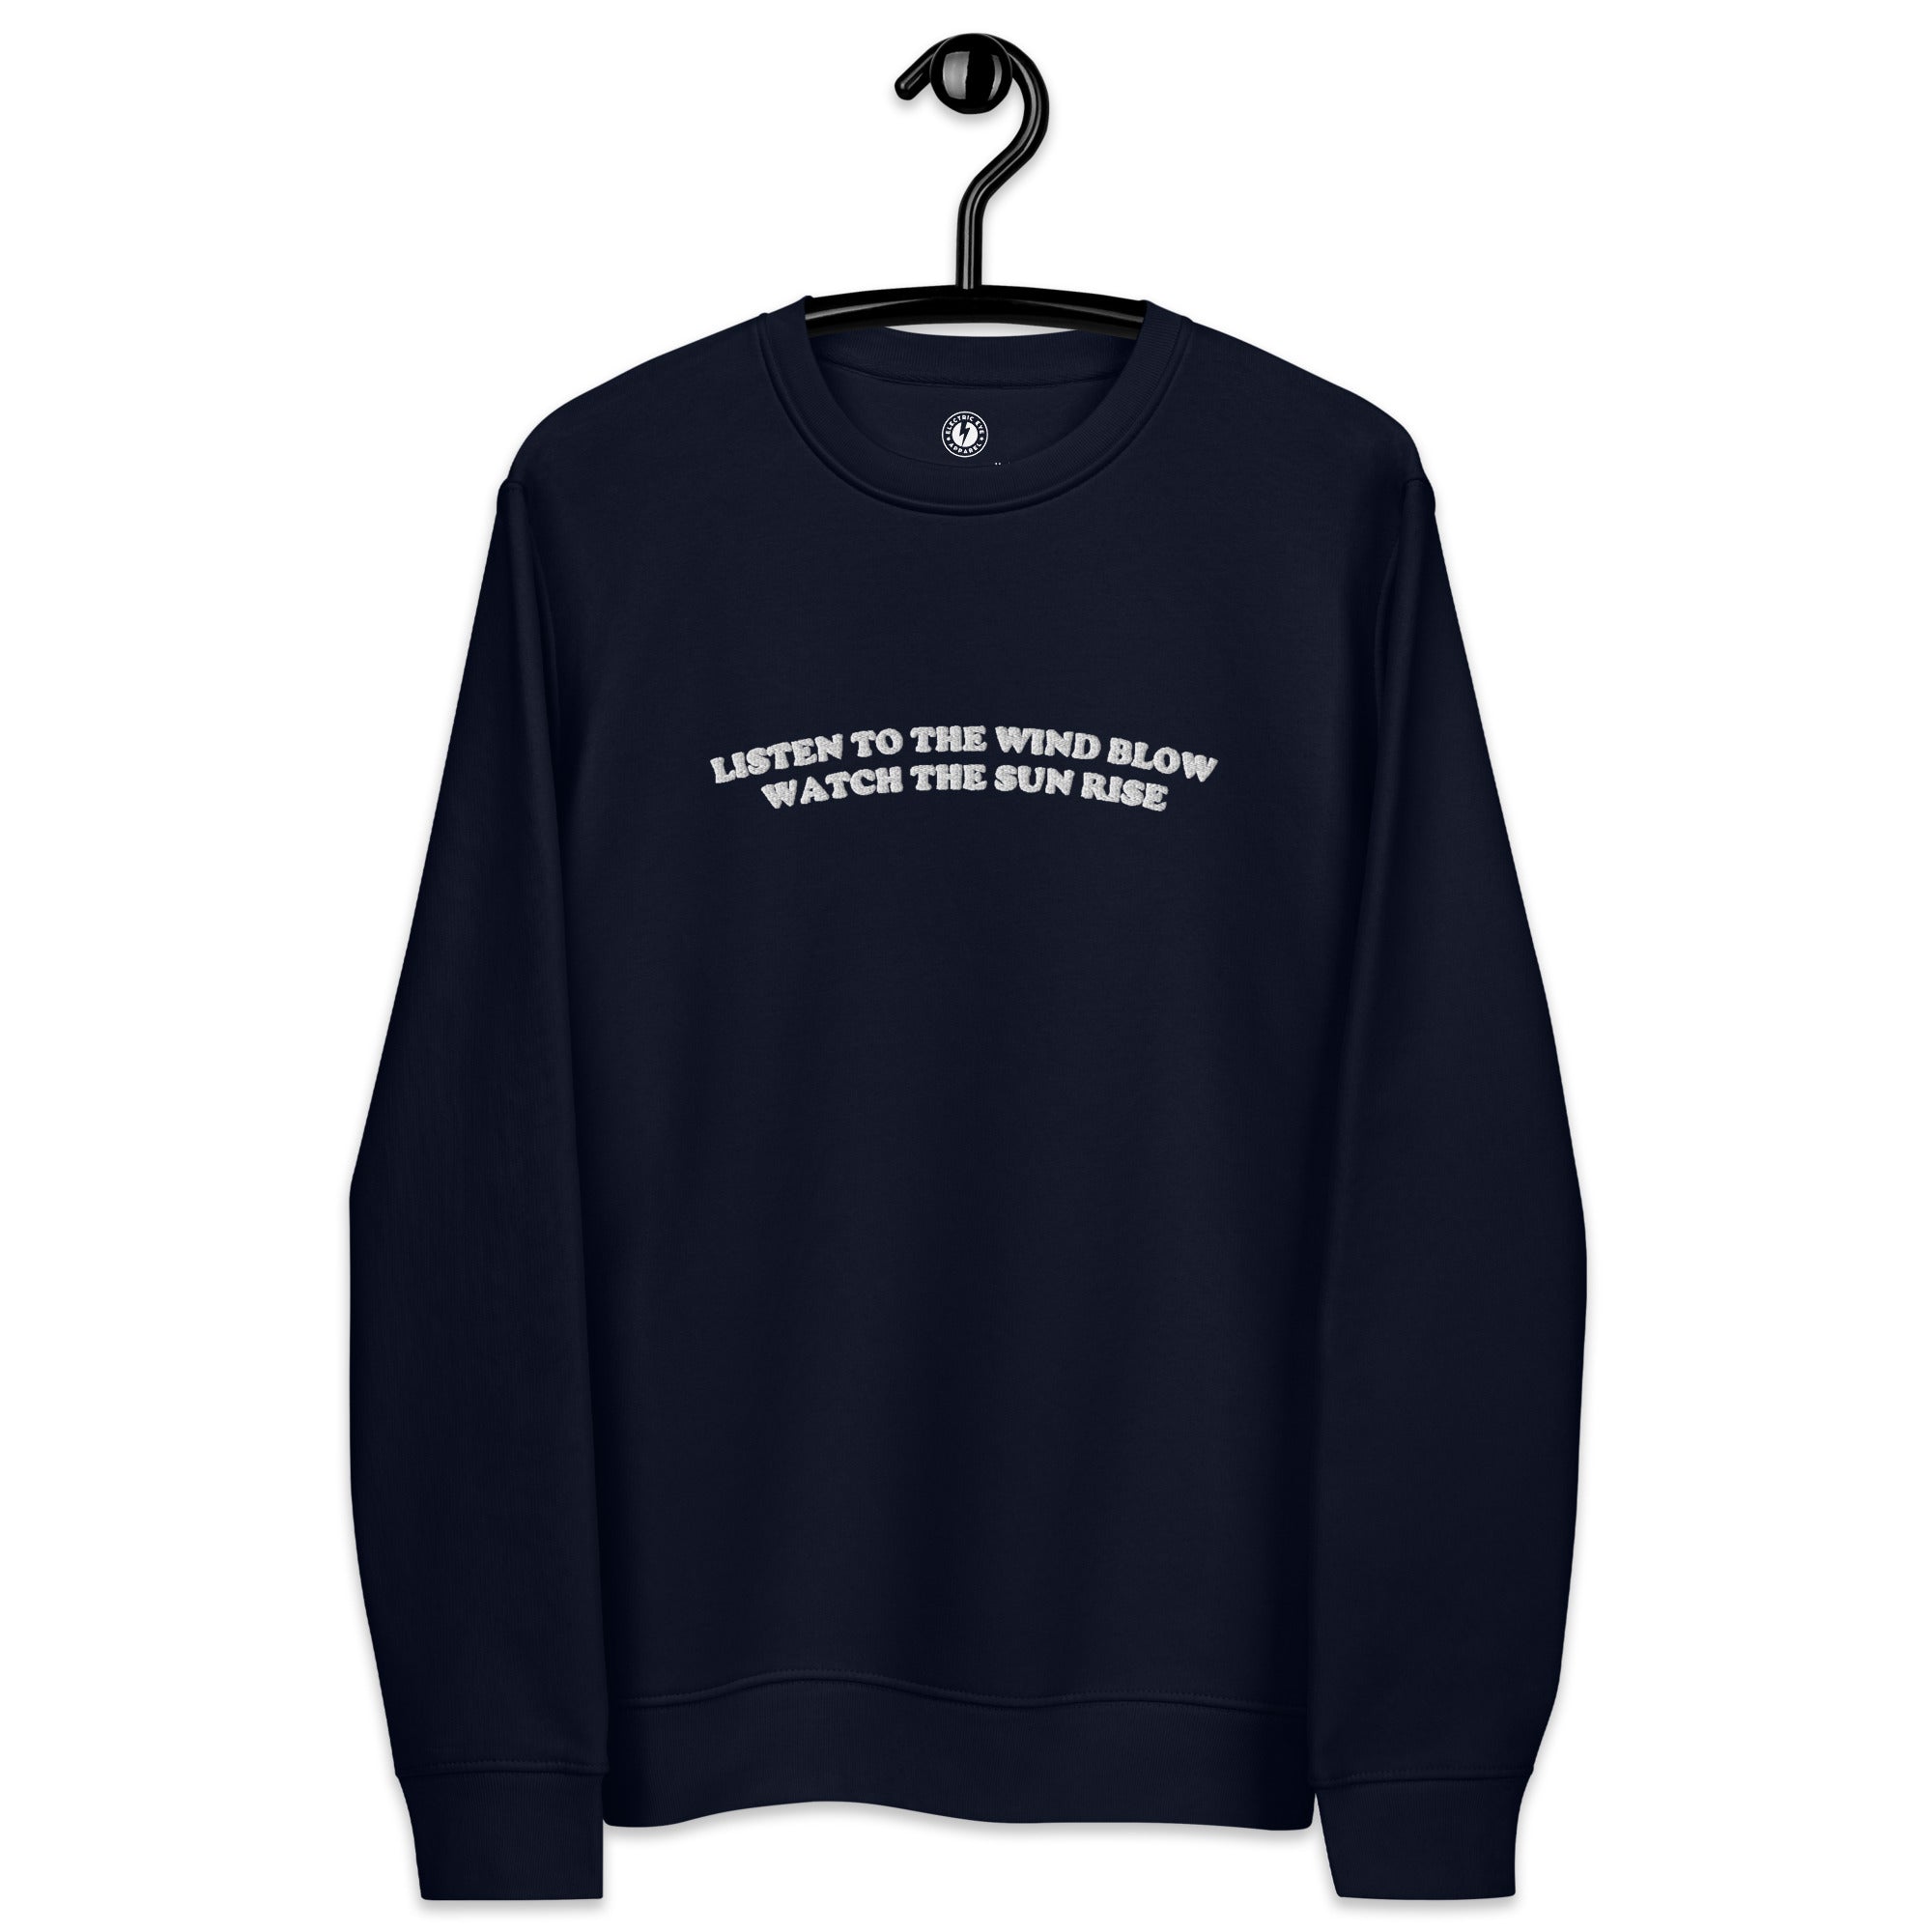 LISTEN TO THE WIND BLOW WATCH THE SUN RISE Embroidered Unisex Organic Sweatshirt (white embroidery)